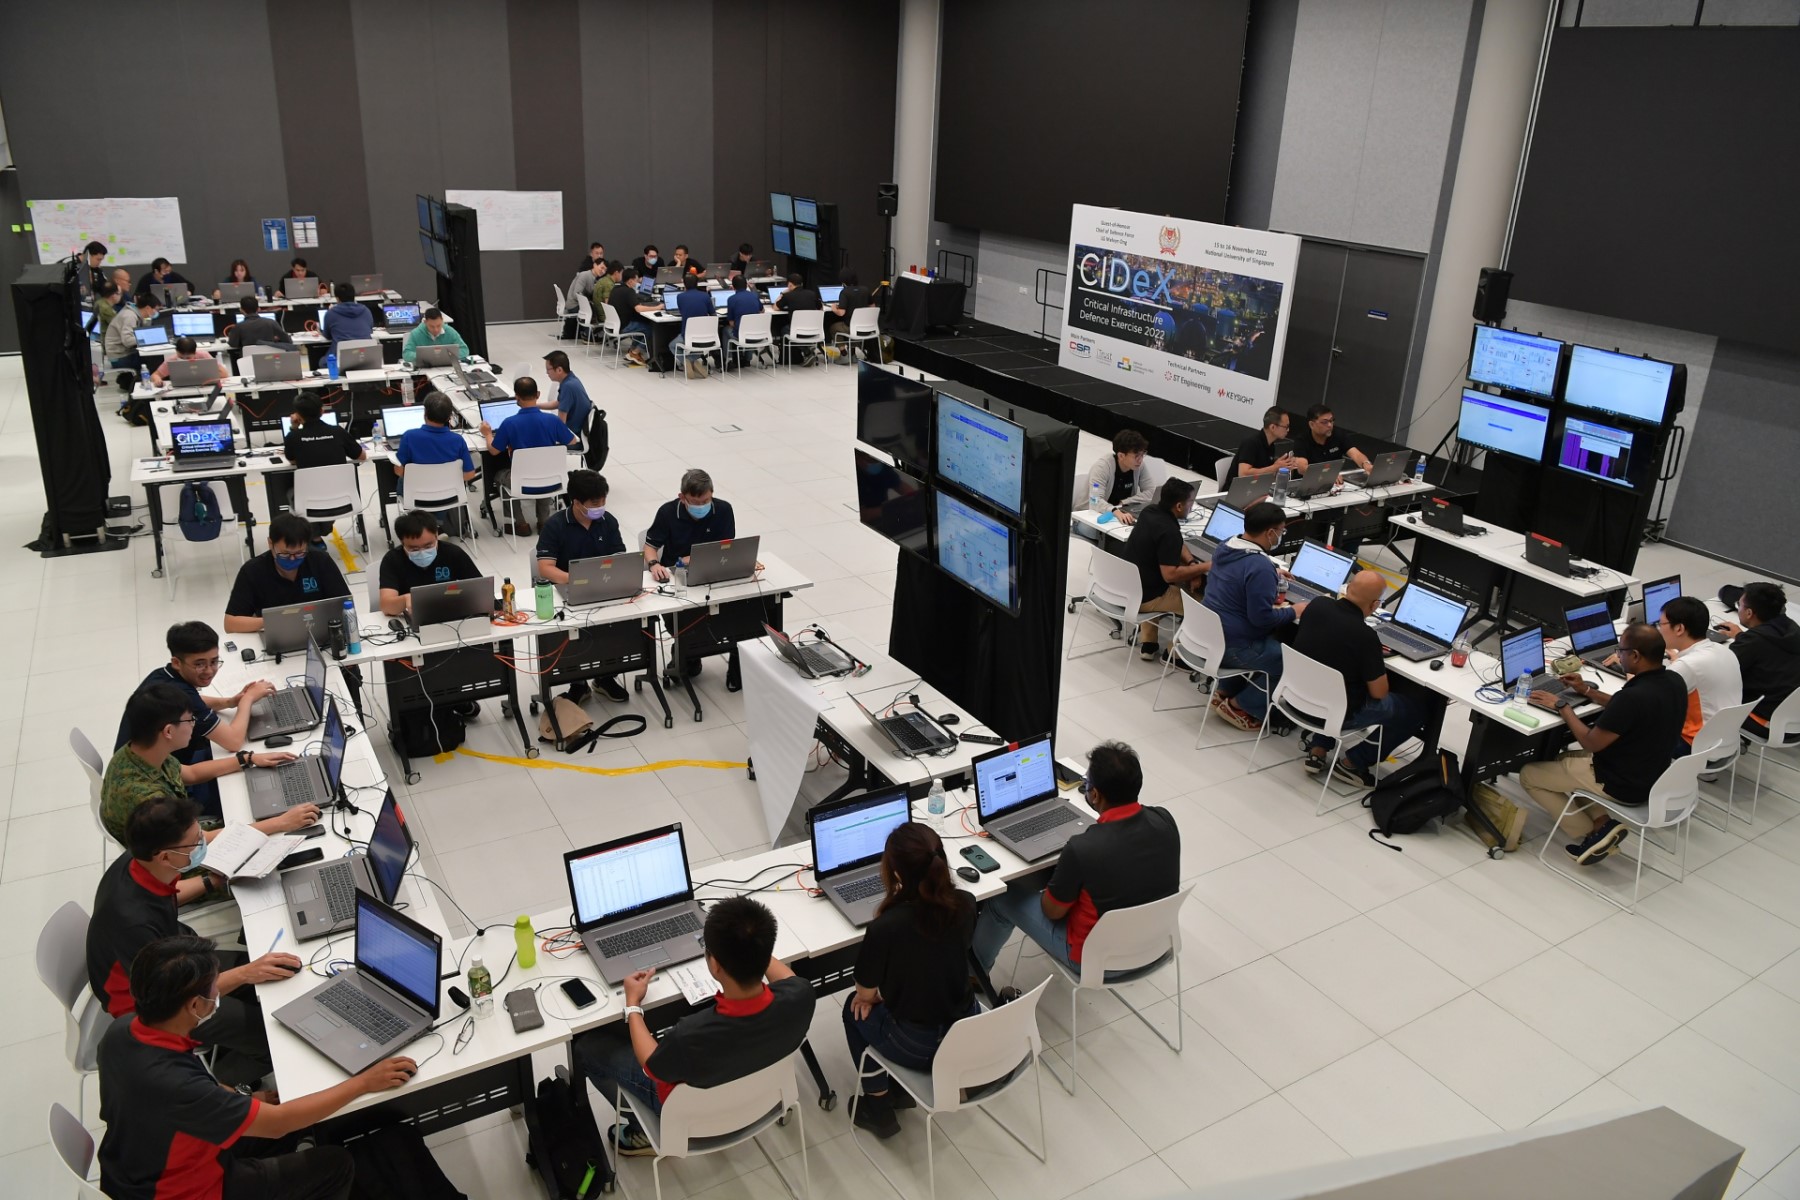 Participants from the Digital and Intelligence Service DIS and 16 other national agencies at the inaugural CIDeX held at the National University of Singapore School of Computing